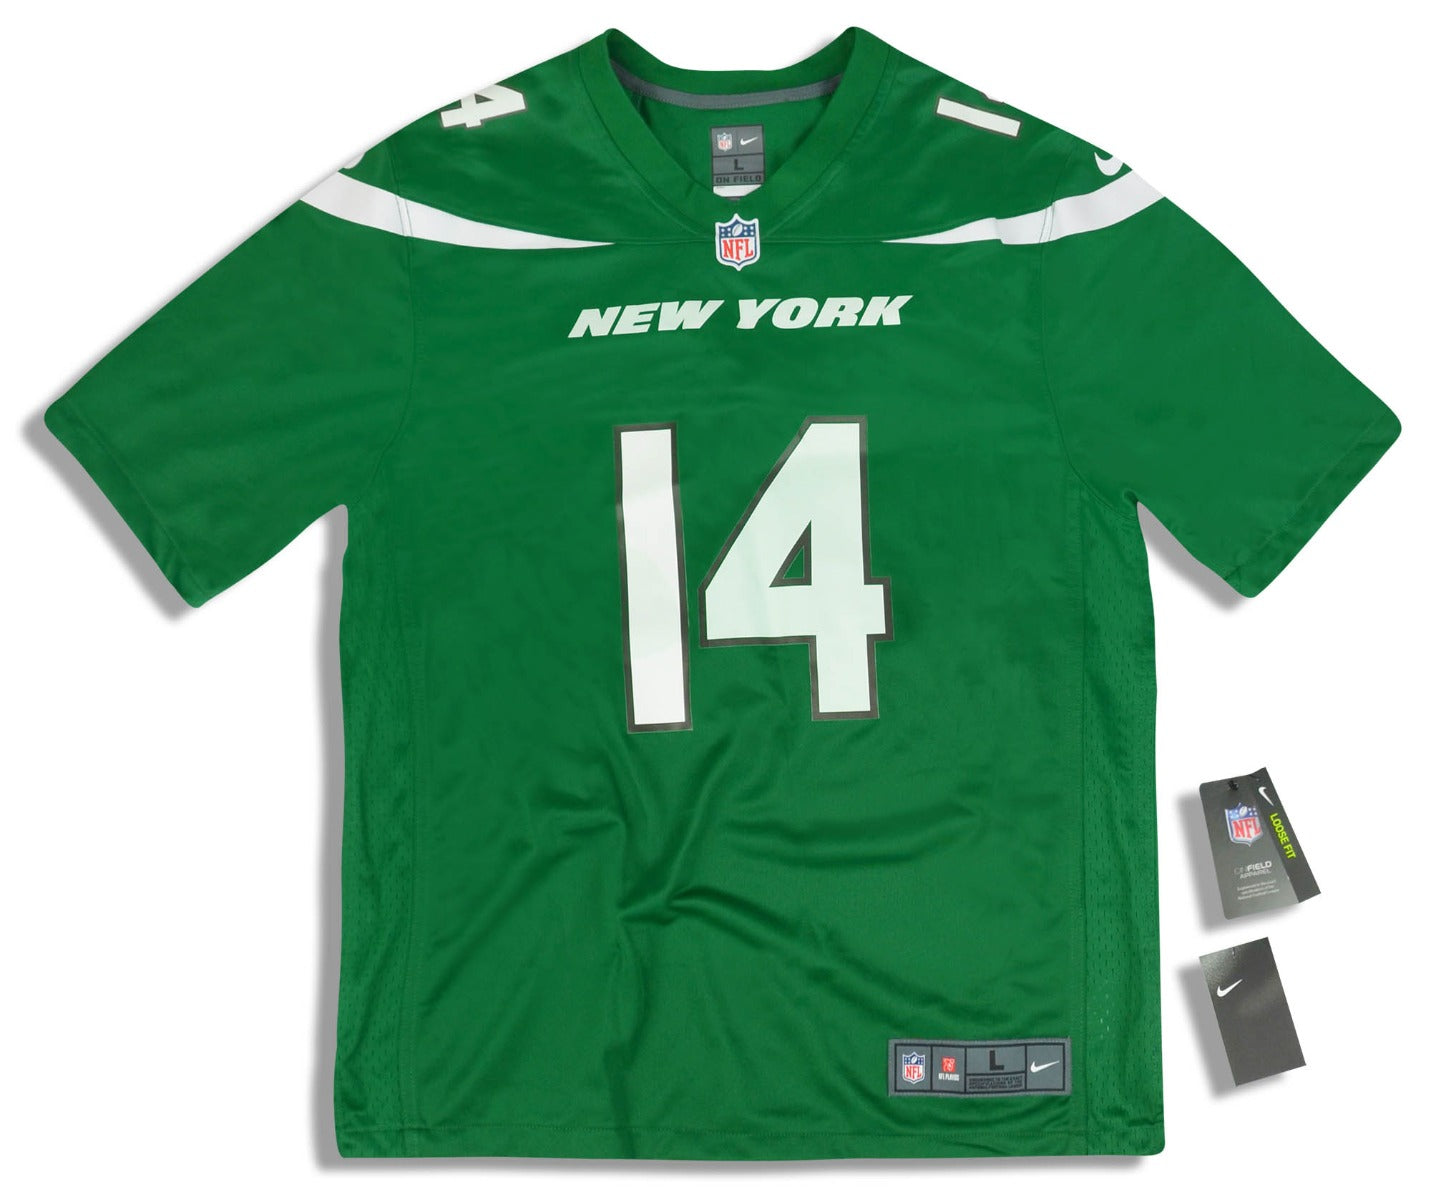 2019 NEW YORK JETS DARNOLD #14 NIKE GAME JERSEY (HOME) L - W/TAGS